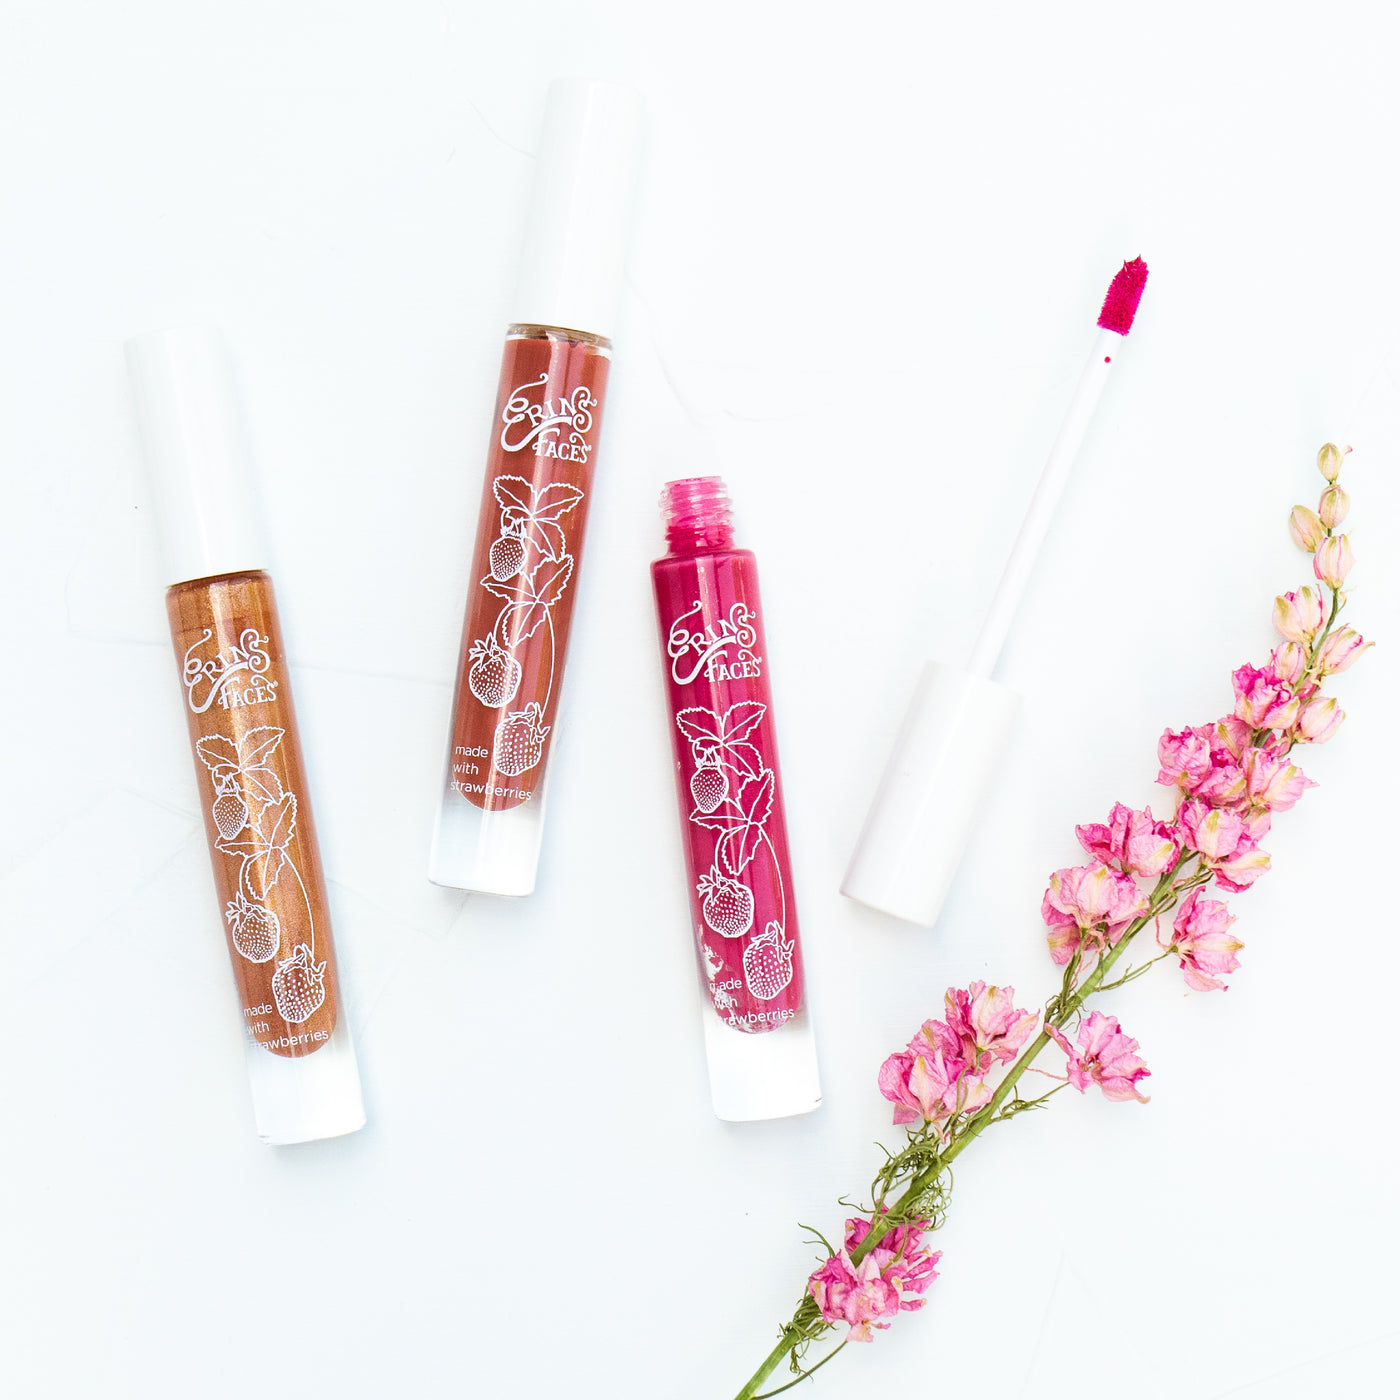 earliglow, sonata, eros fruit smoothie lip glosses from erin's faces with pink larkspur on white background